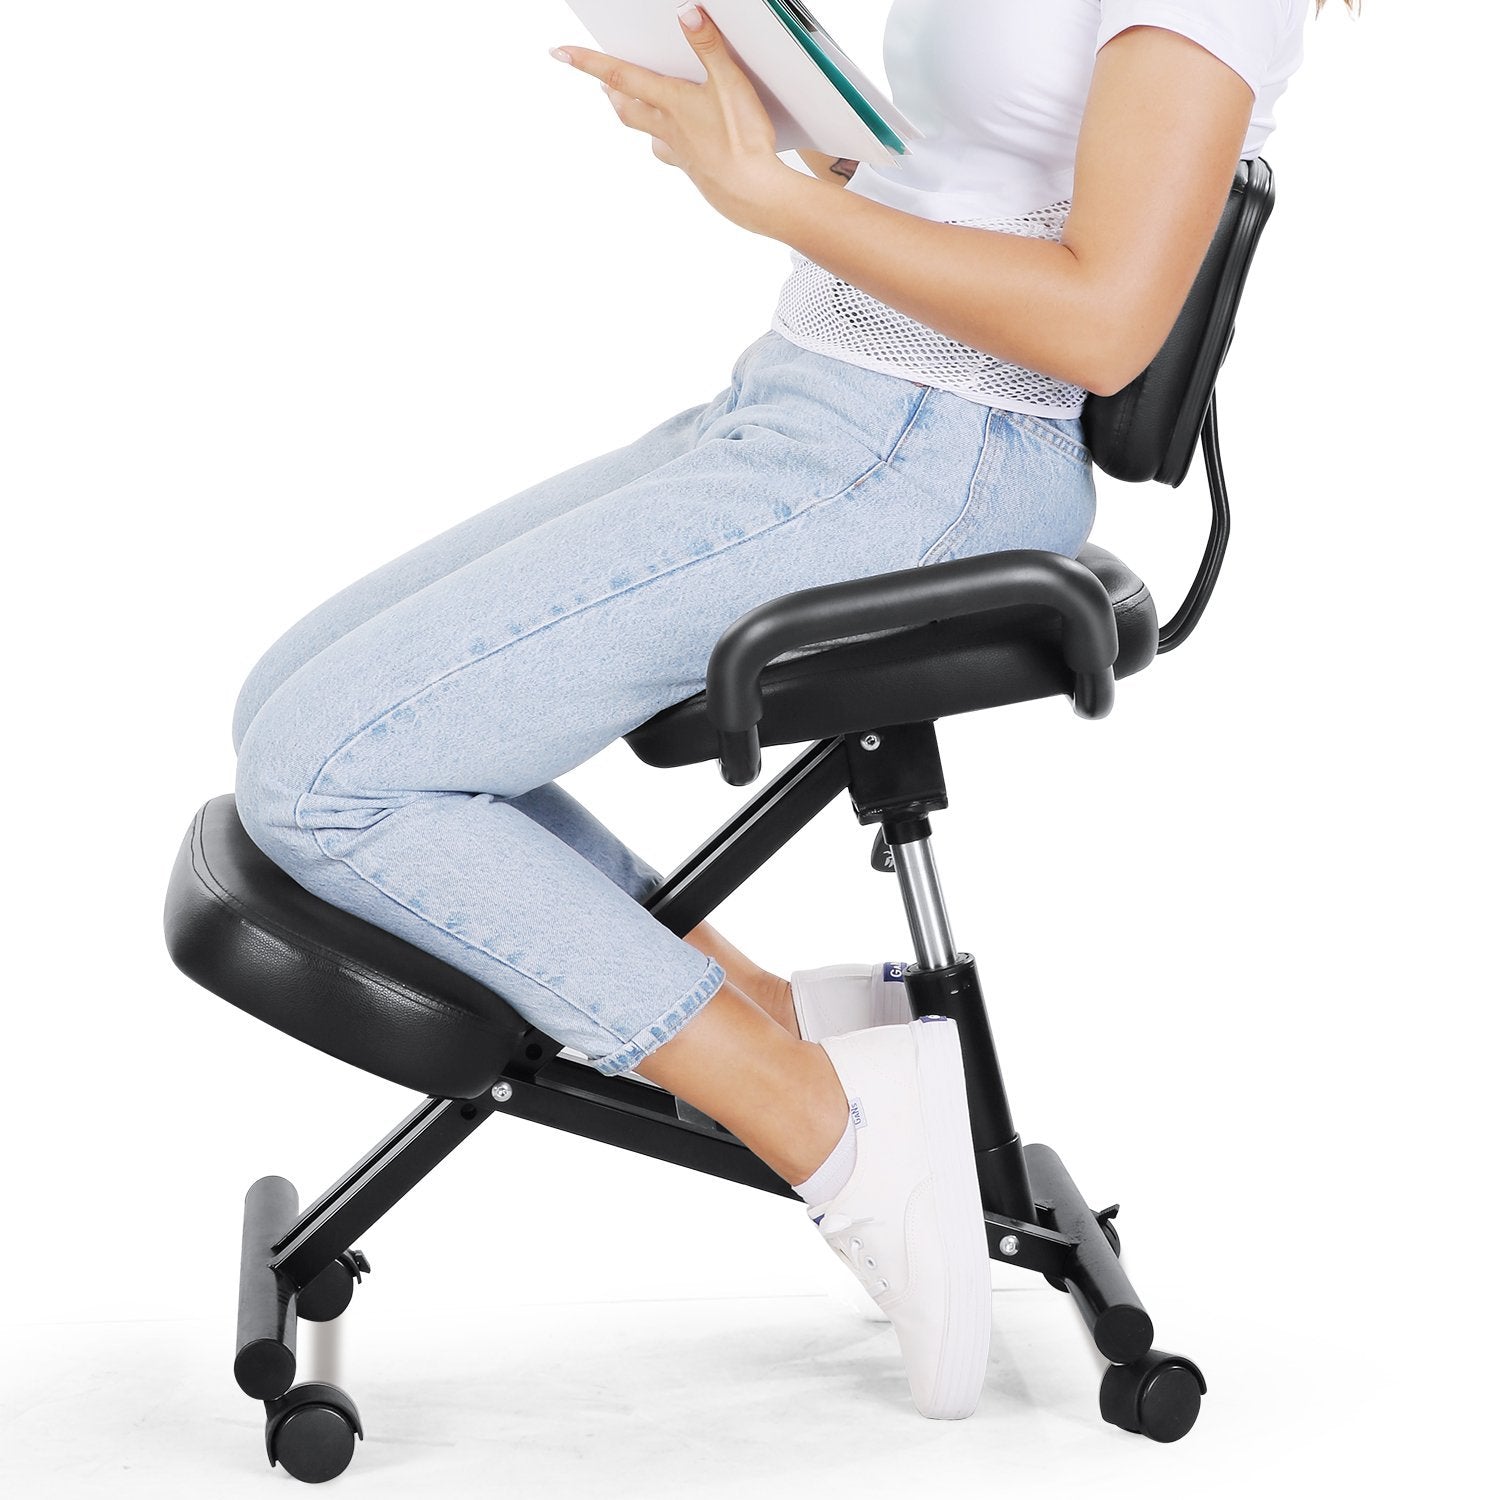 https://www.marnur.net/cdn/shop/products/maxkare-ergonomic-kneeling-chair-office-home-chair-with-adjustable-height-for-posture-correct-bad-backs-neck-pain-relieving-spine-tension-relief-thick-comfortab-276452_1500x.jpg?v=1626766978